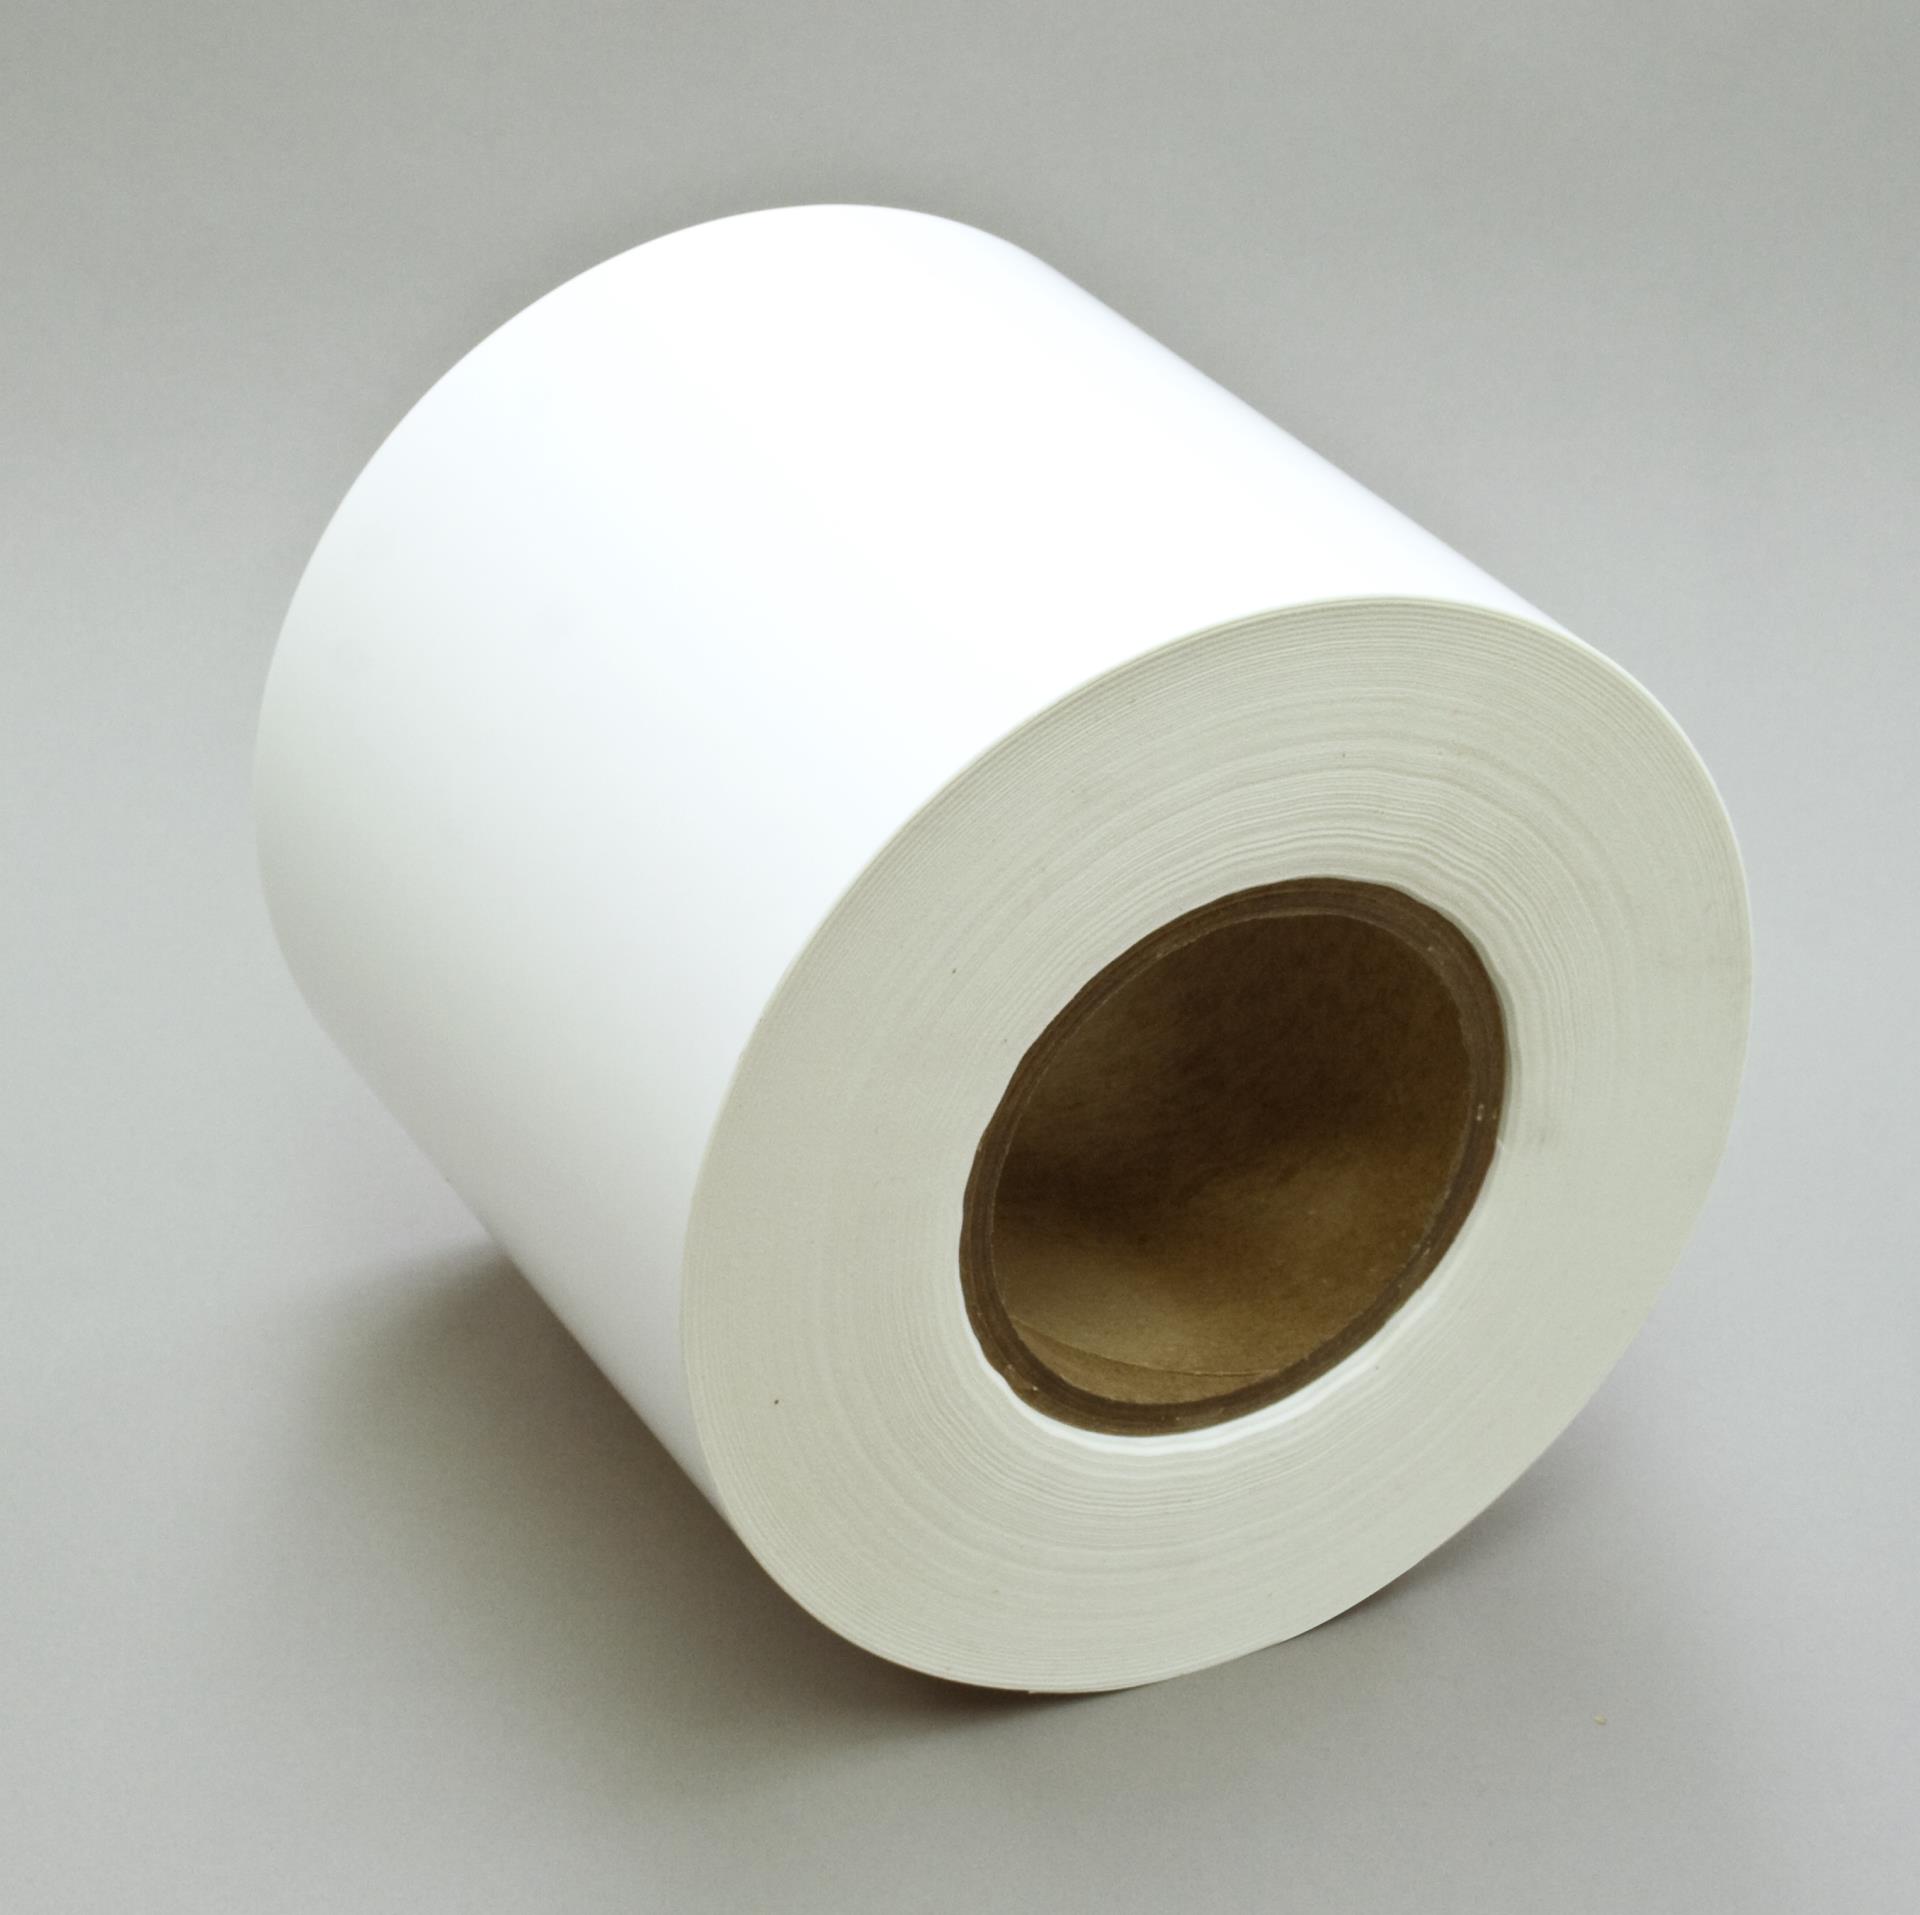 00021200688232 3M™ Dot Matrix Label Material 7811, Matte White Polyimide,  in x 500 ft, roll per case Aircraft products label-stock 9381893